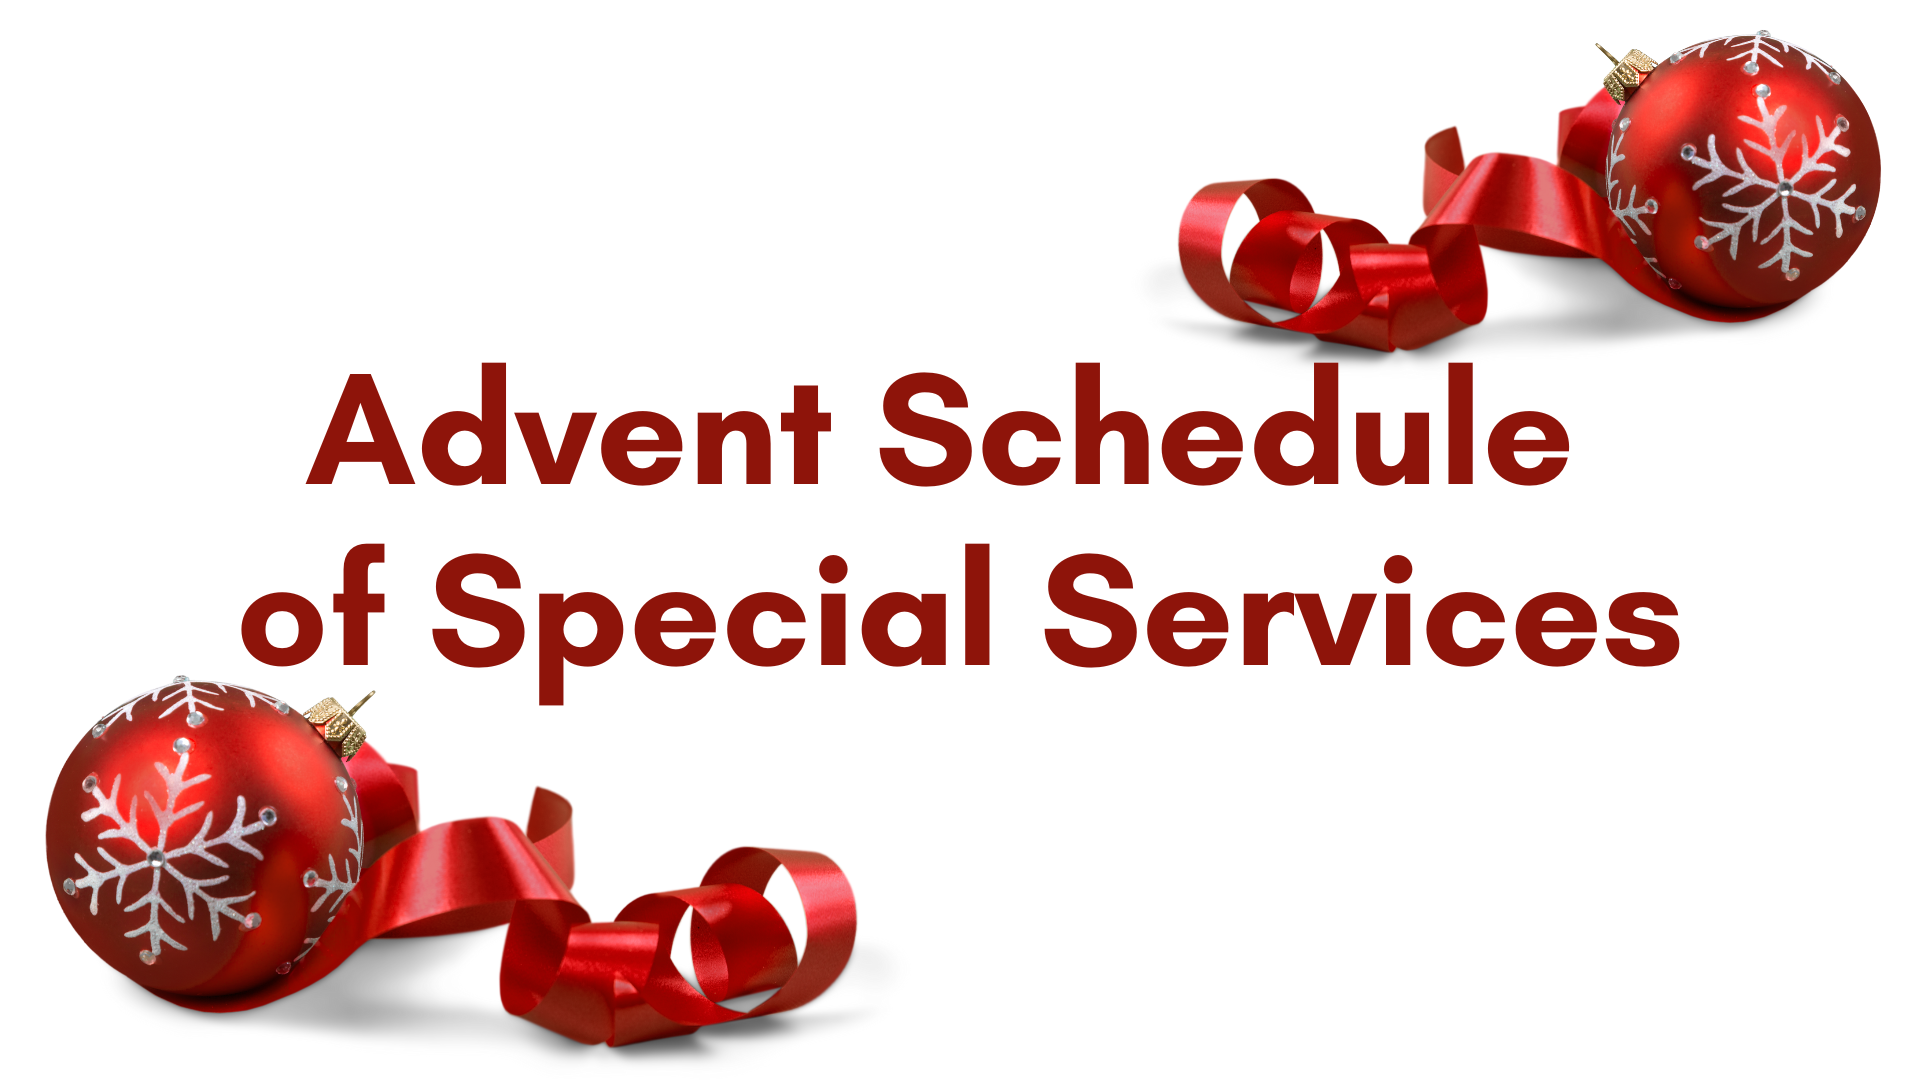 Advent Schedule of Special Services